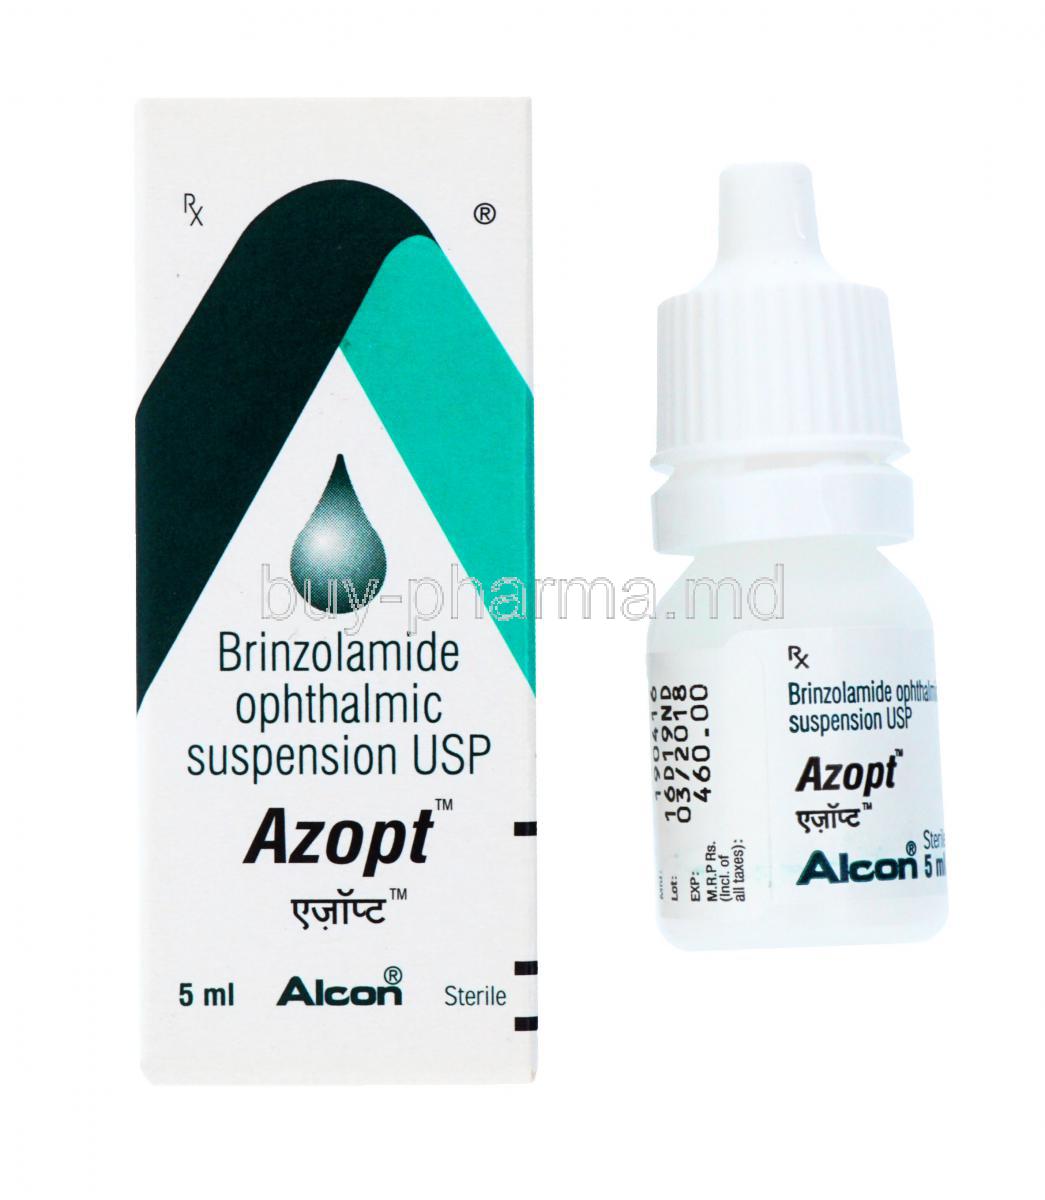 Azopt Eye Solution, Brinzolamide ophthalmic suspension USP, 5ml sterile, box and bottle front presentation